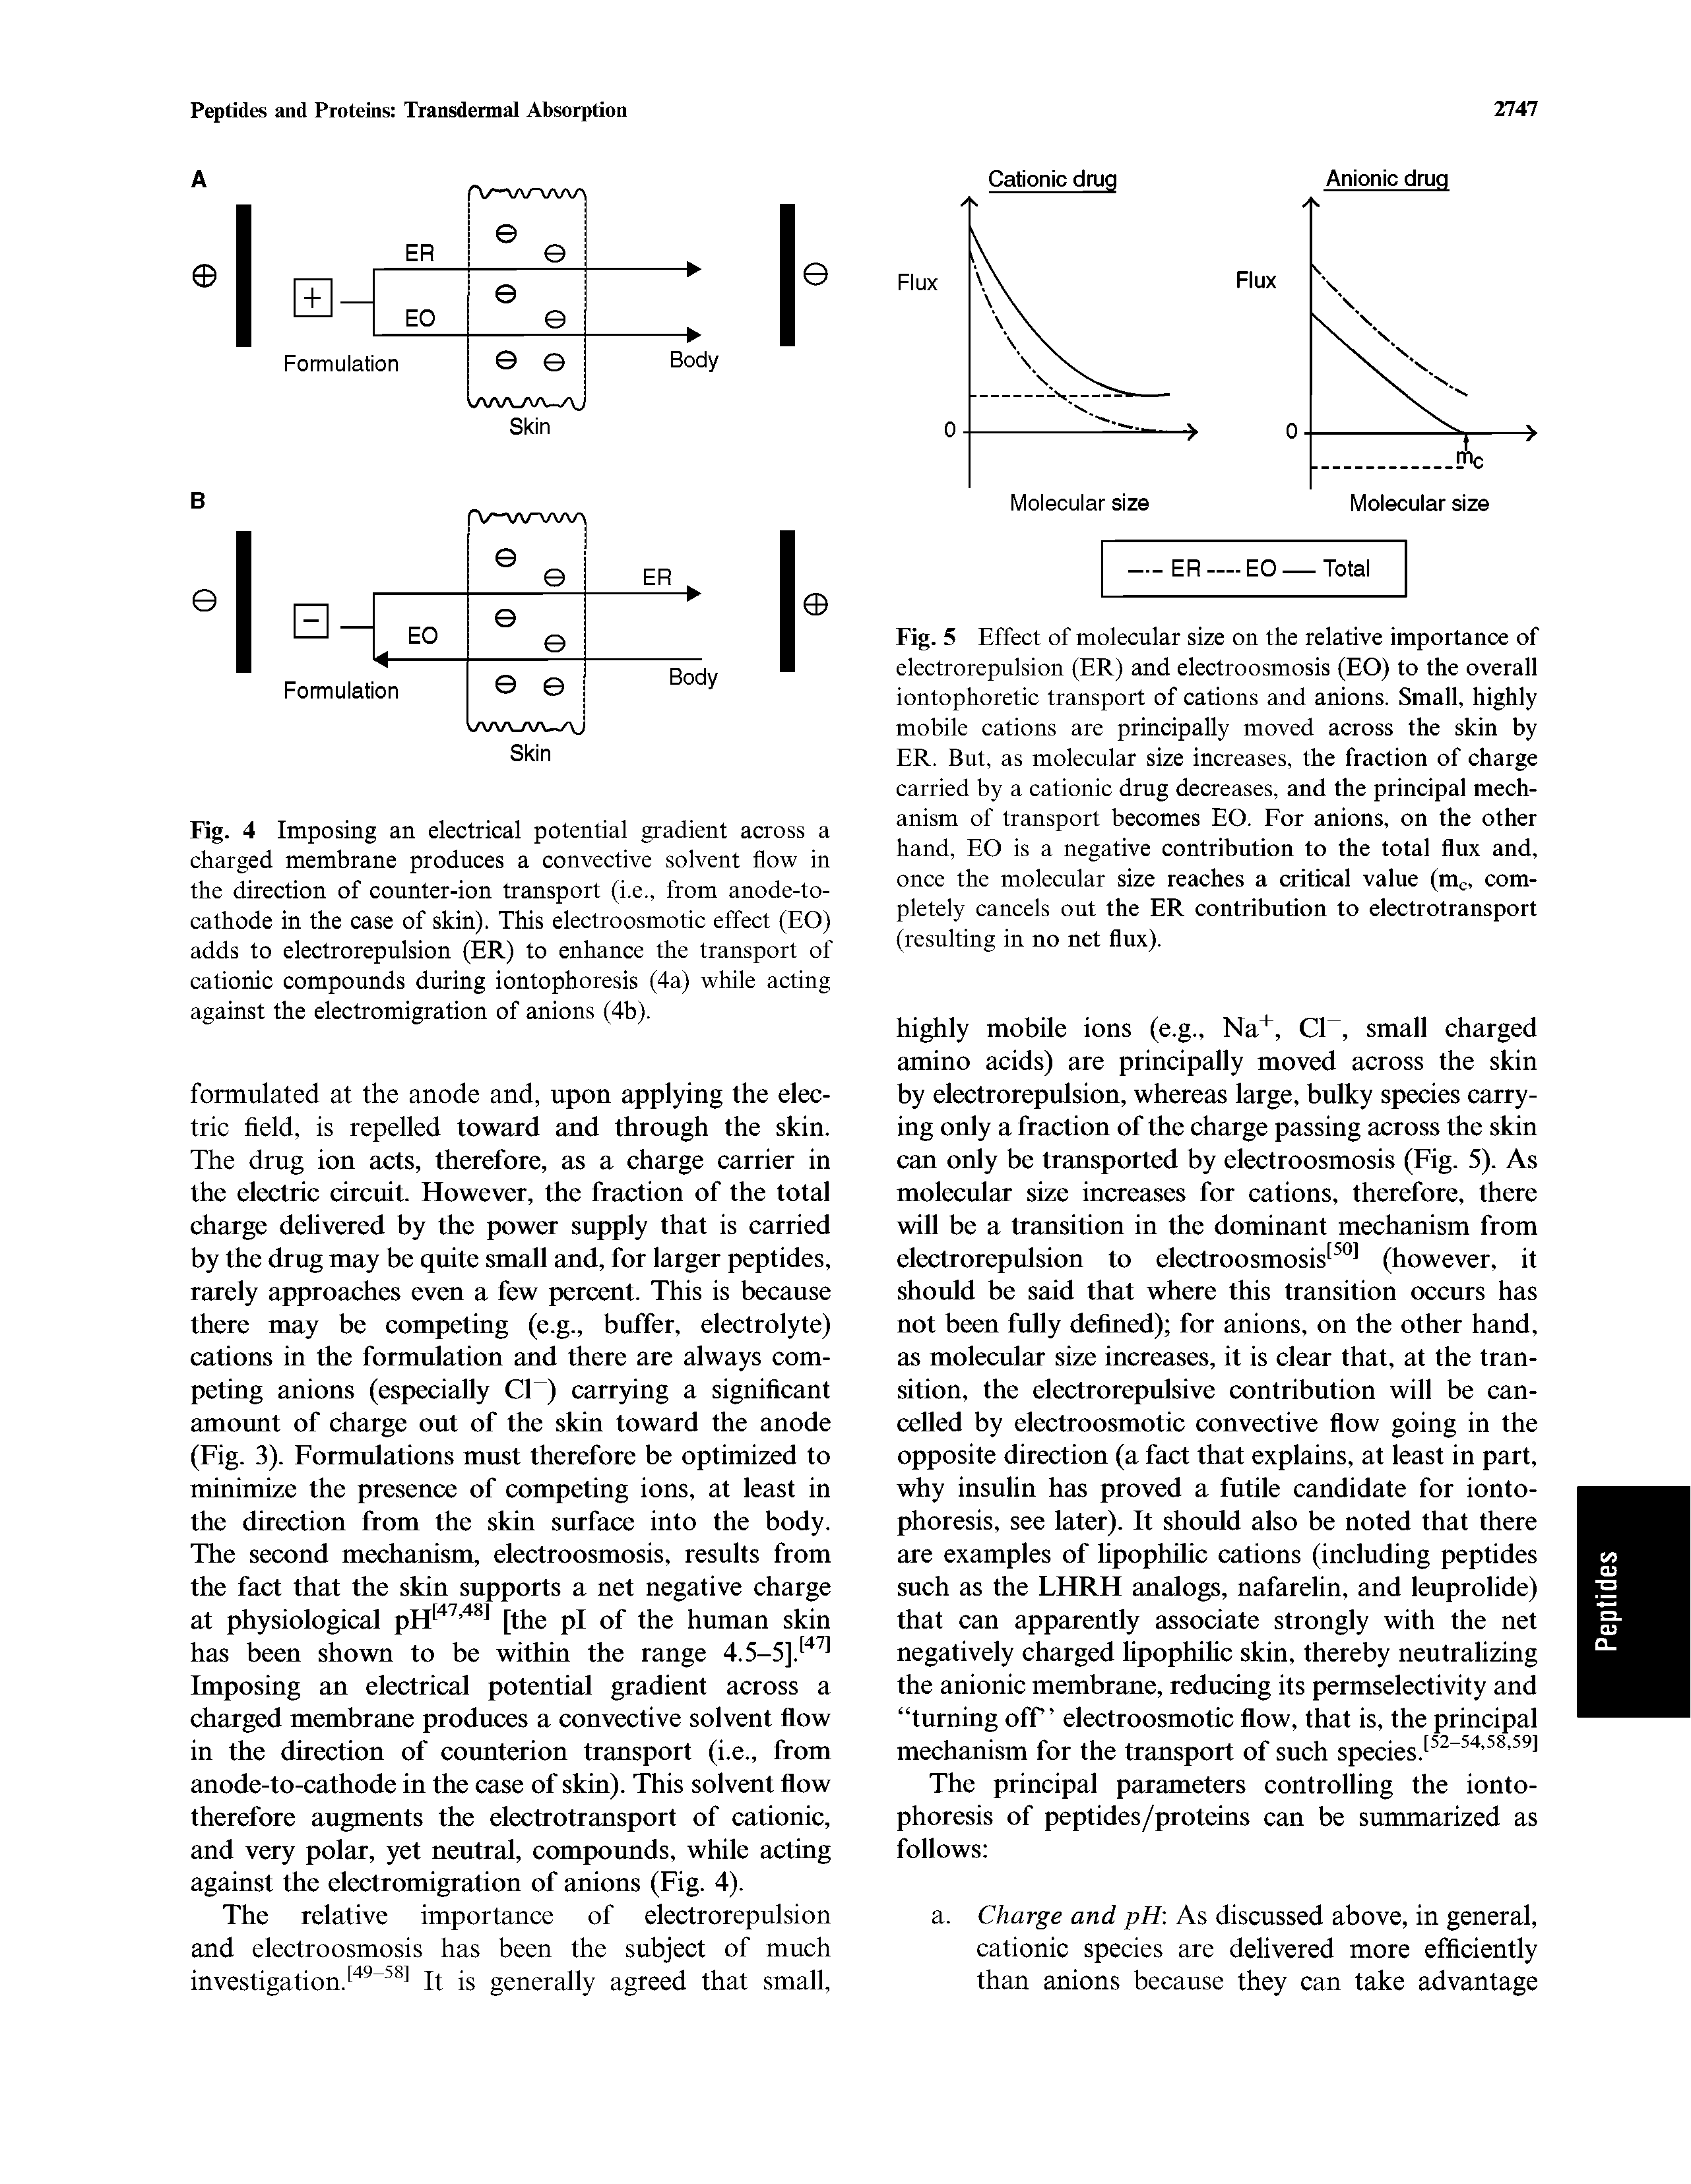 Fig. 4 Imposing an electrical potential gradient across a charged membrane produces a convective solvent flow in the direction of counter-ion transport (i.e., from anode-to-cathode in the case of skin). This electroosmotic effect (EO) adds to electrorepulsion (ER) to enhance the transport of cationic compounds during iontophoresis (4a) while acting against the electromigration of anions (4b).